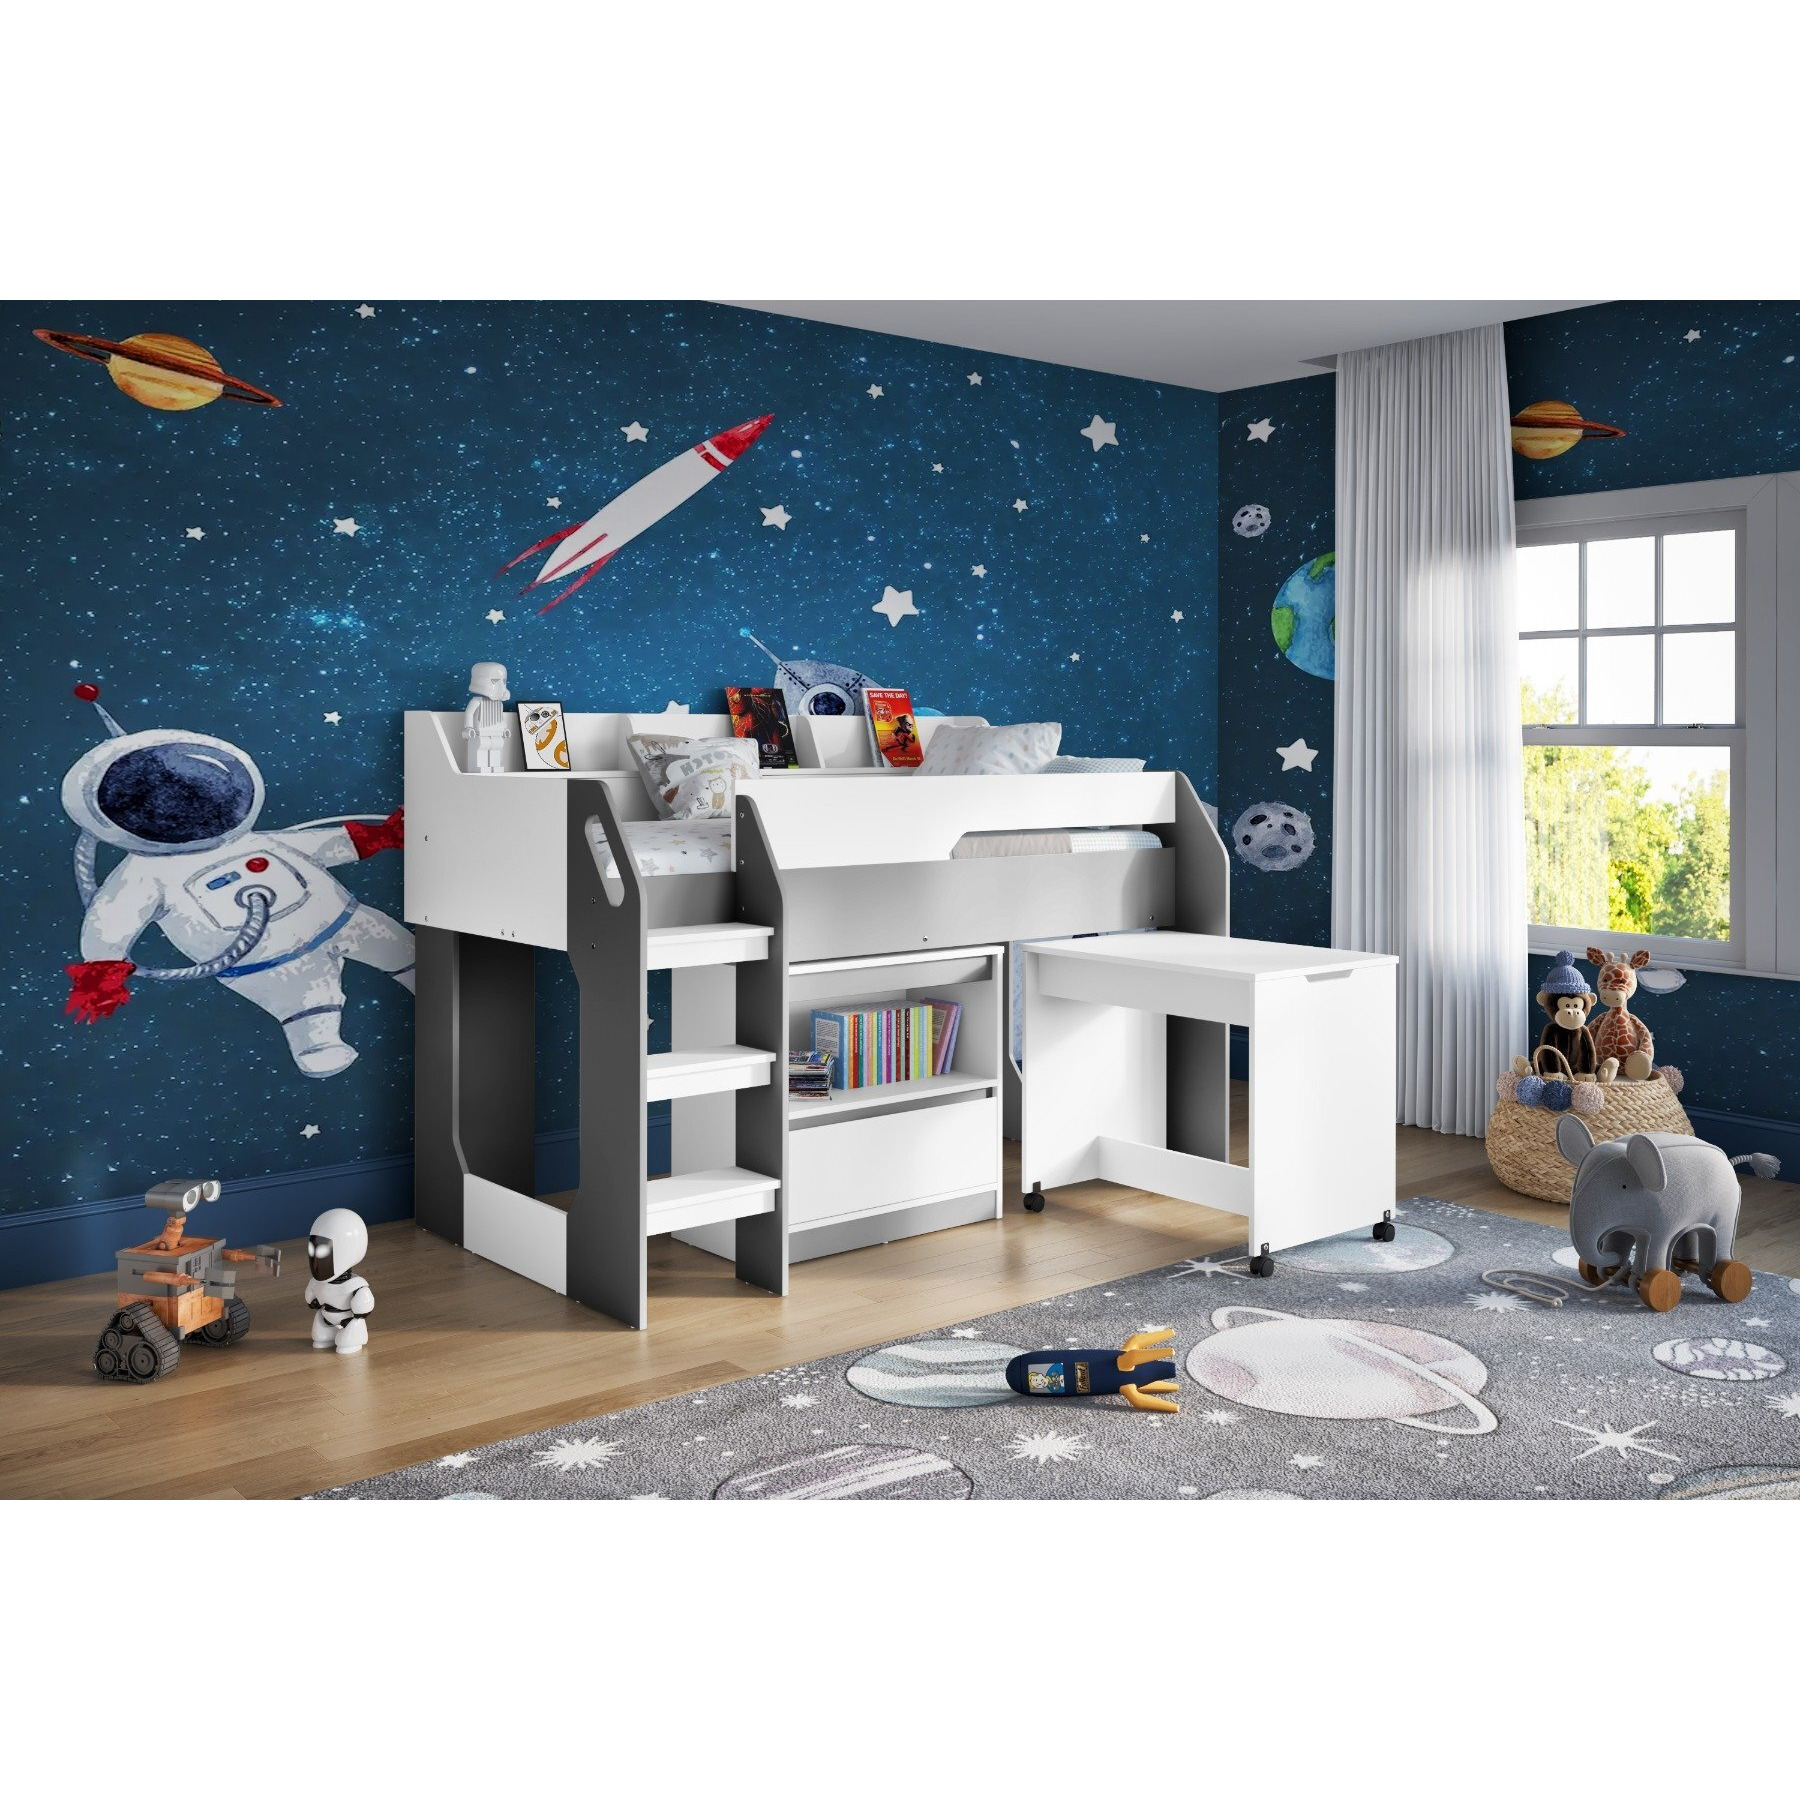 Flair Lulu Midsleeper with Storage in White And Grey - image 1